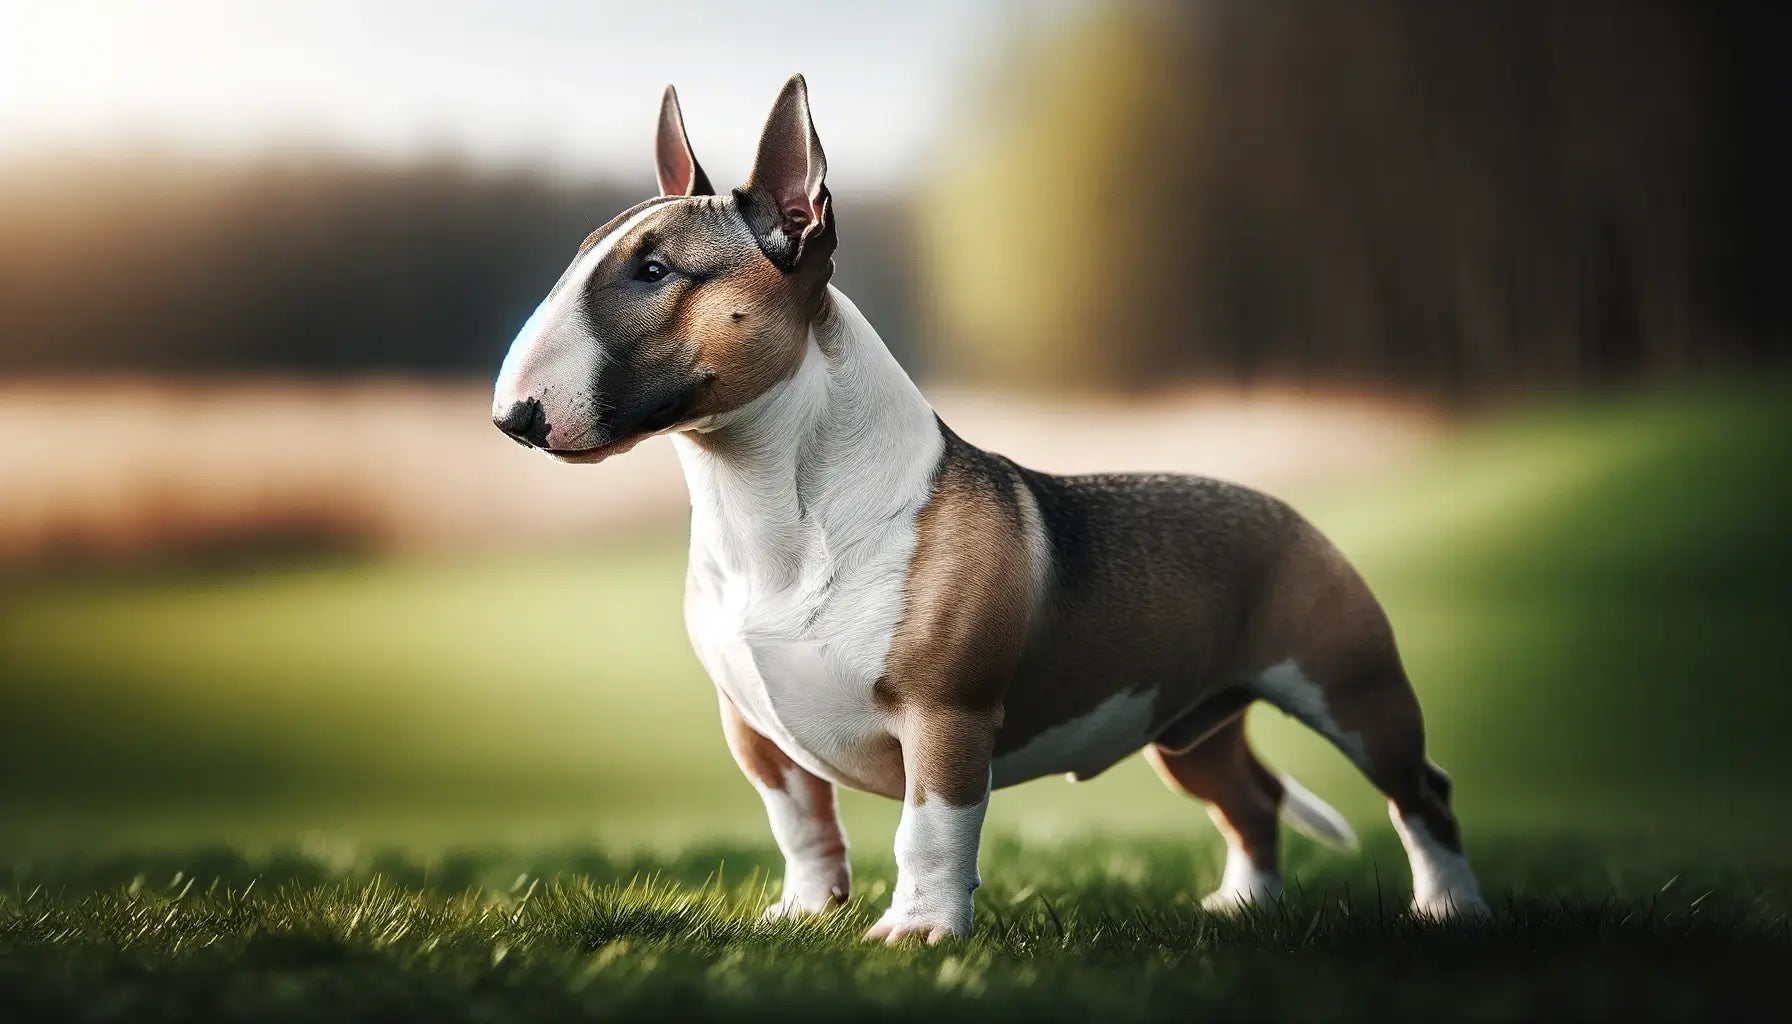 A Bull Terrier stands in profile on green grass, highlighting its compact muscular build and the iconic shape of its head.